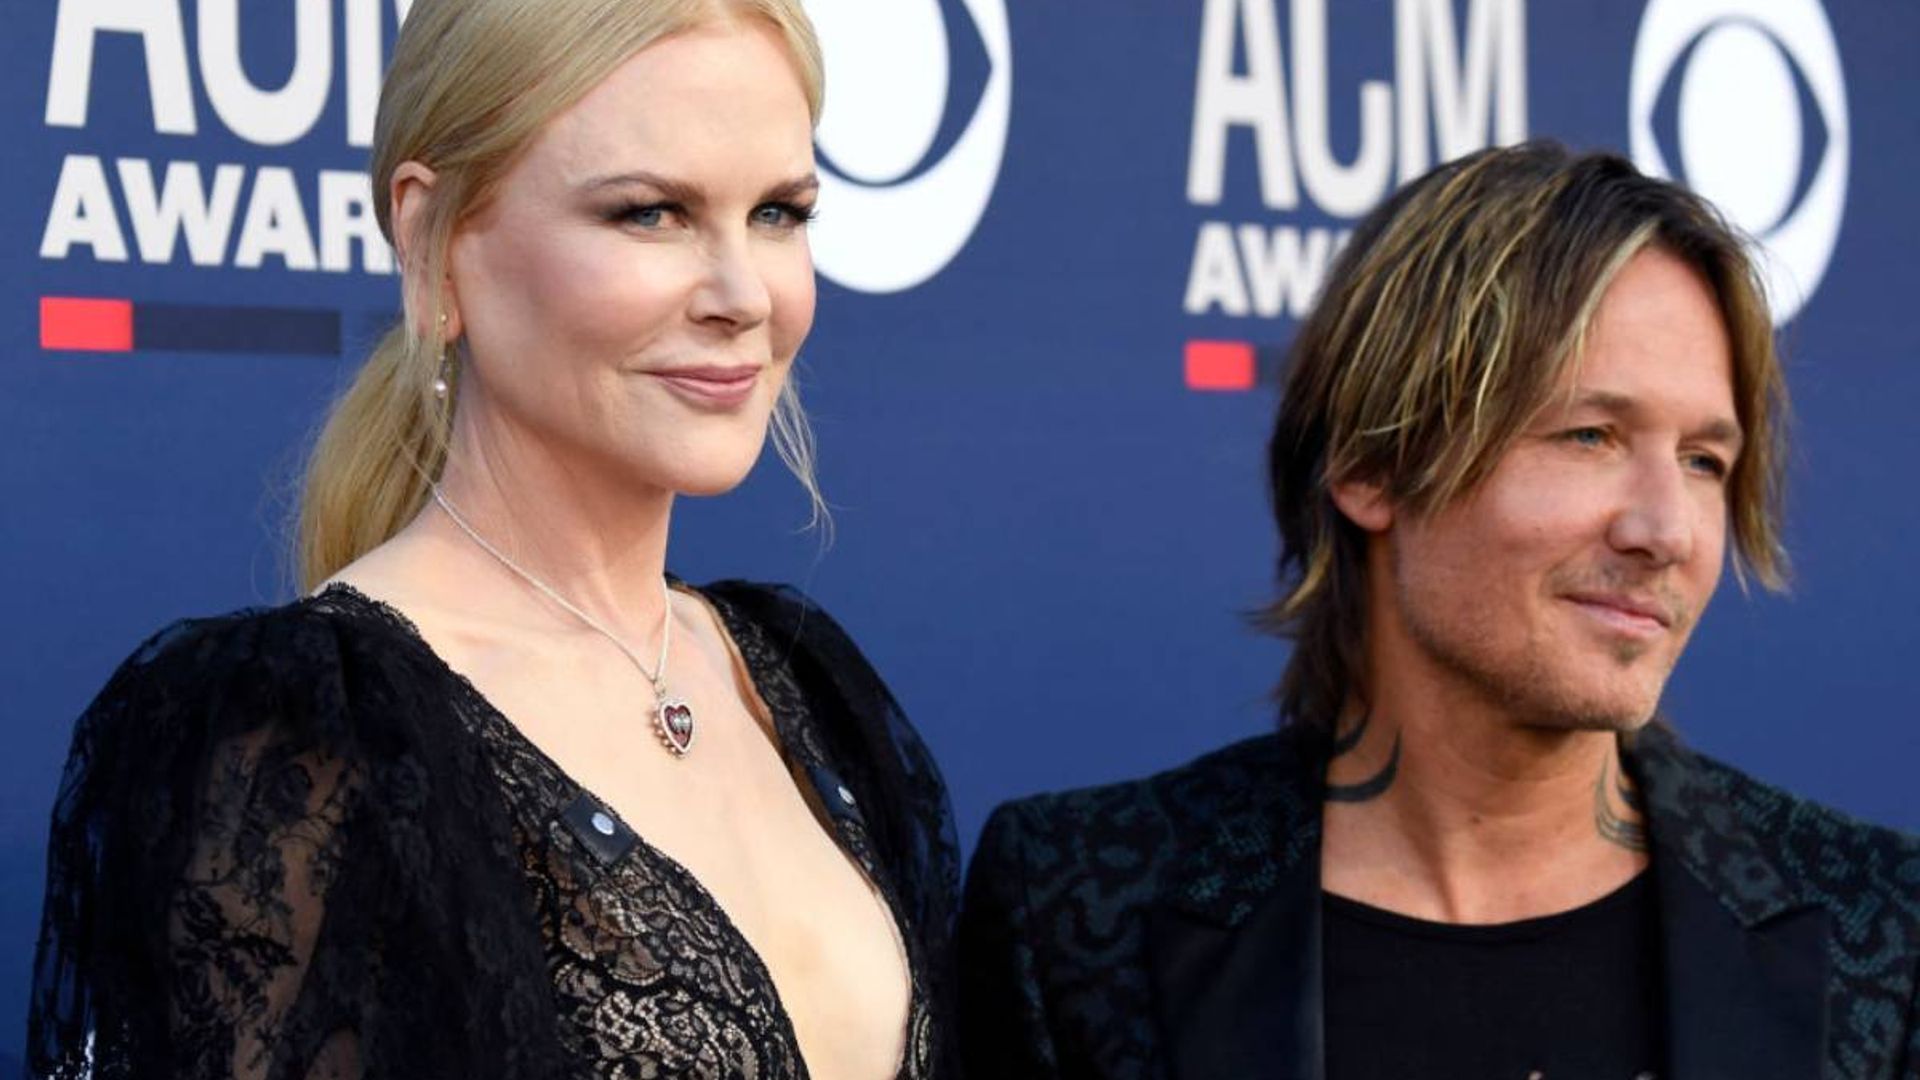 Nicole Kidman and Keith Urban make emotional family decision for the sake of their daughters